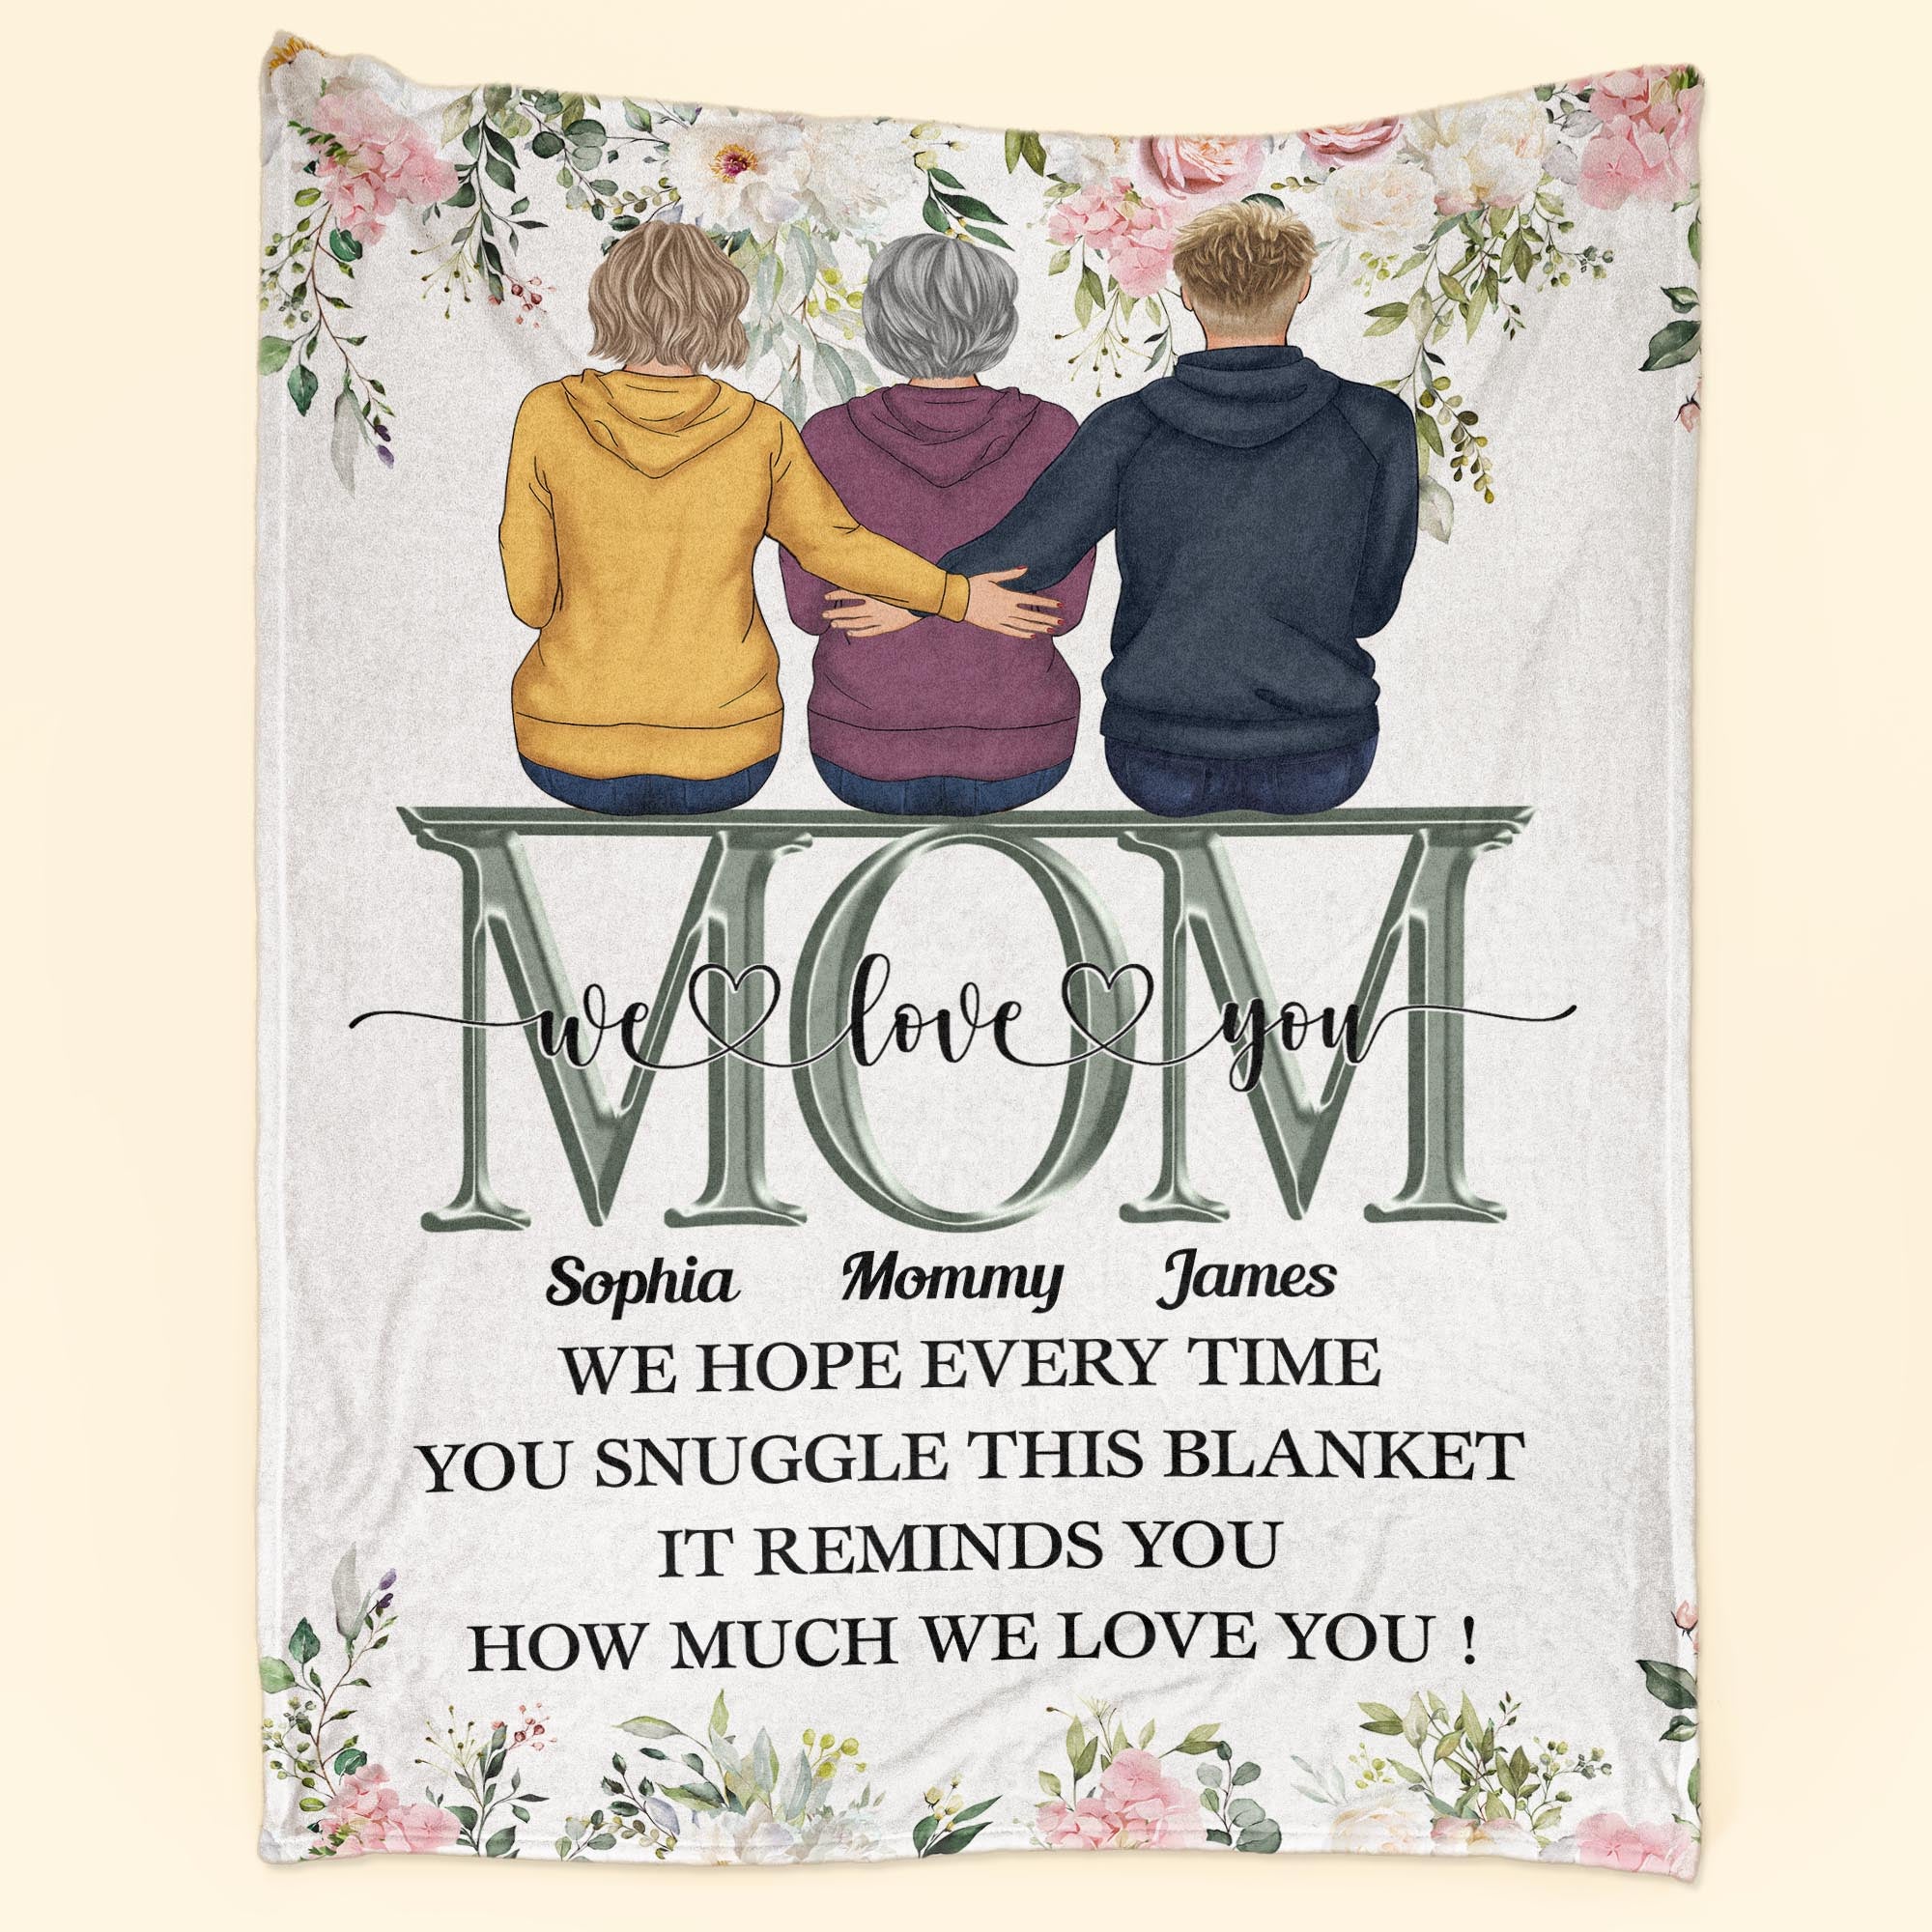 This Blanket Reminds You How Much We Love You - Personalized